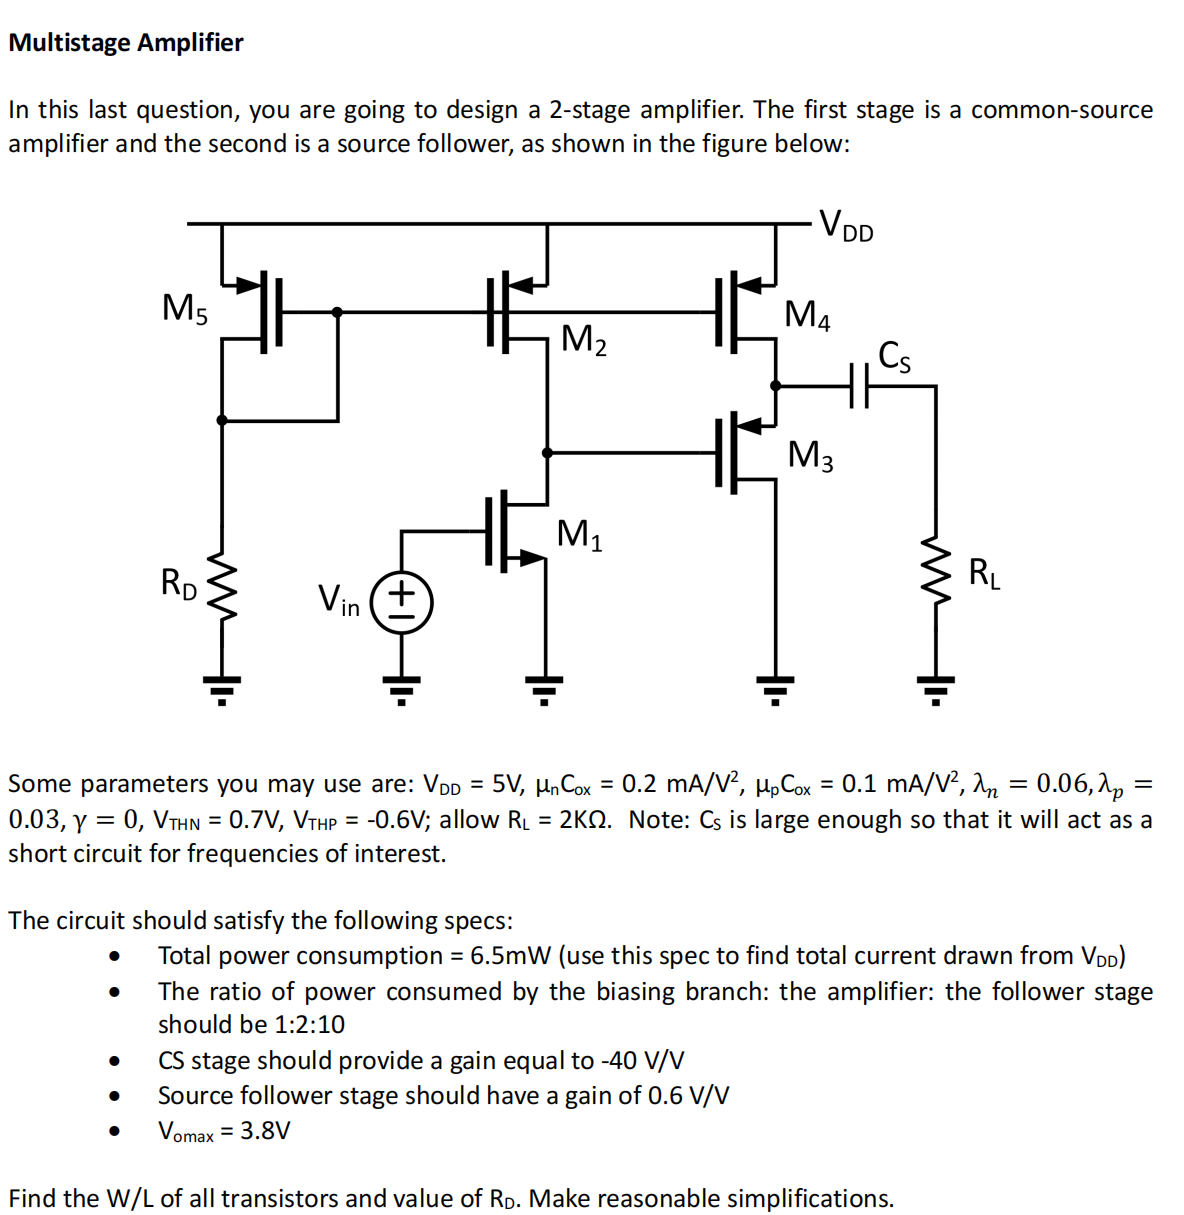 Multistage Amplifier In this last question, you are going to design a 2-stage amplifier. The first stage is a common-source amplifier and the second is a source follower, as shown in the figure below: Some parameters you may use are: VDD = 5 V, μnCox = 0.2 mA/V2, μpCox = 0.1 mA/V2, λn = 0.06, λp = 0.03, γ = 0, VTHN = 0.7 V, VTHP = −0.6 V; allow RL = 2 KΩ. Note: CS is large enough so that it will act as a short circuit for frequencies of interest. The circuit should satisfy the following specs: Total power consumption = 6.5 mW (use this spec to find total current drawn from VDD) The ratio of power consumed by the biasing branch: the amplifier: the follower stage should be 1:2:10 CS stage should provide a gain equal to −40 V/V Source follower stage should have a gain of 0.6 V/V Vomax = 3.8 V Find the W/L of all transistors and value of RD. Make reasonable simplifications.